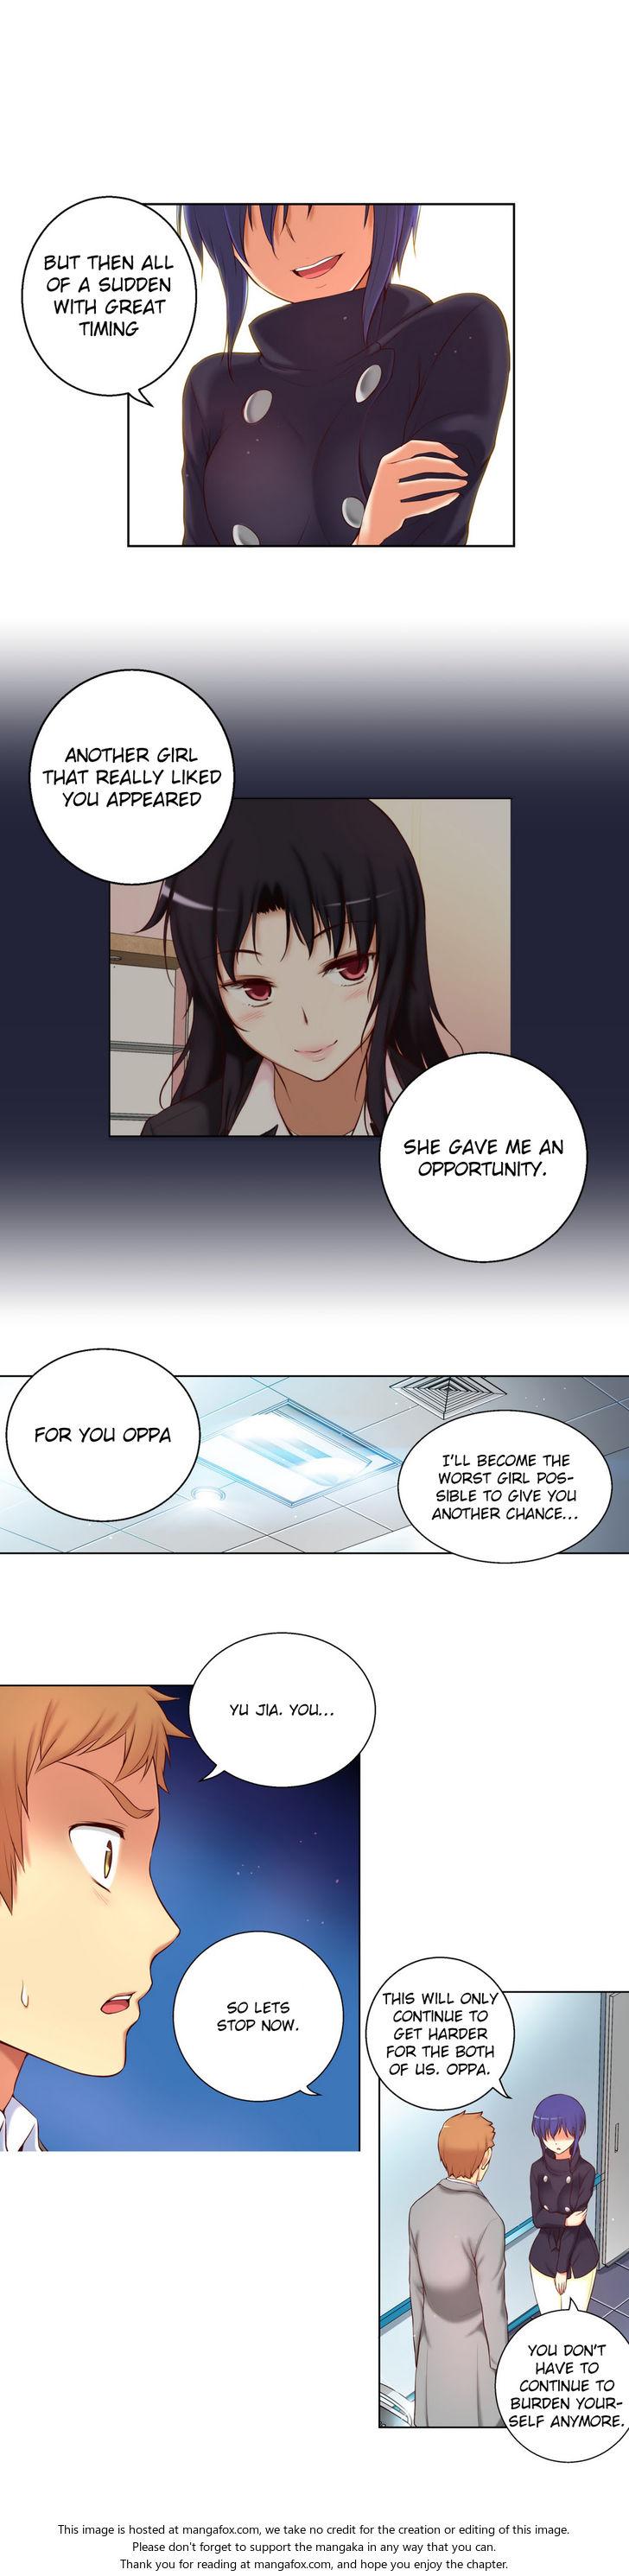 [Donggul Gom] She is Young (English) Part 1/2 953